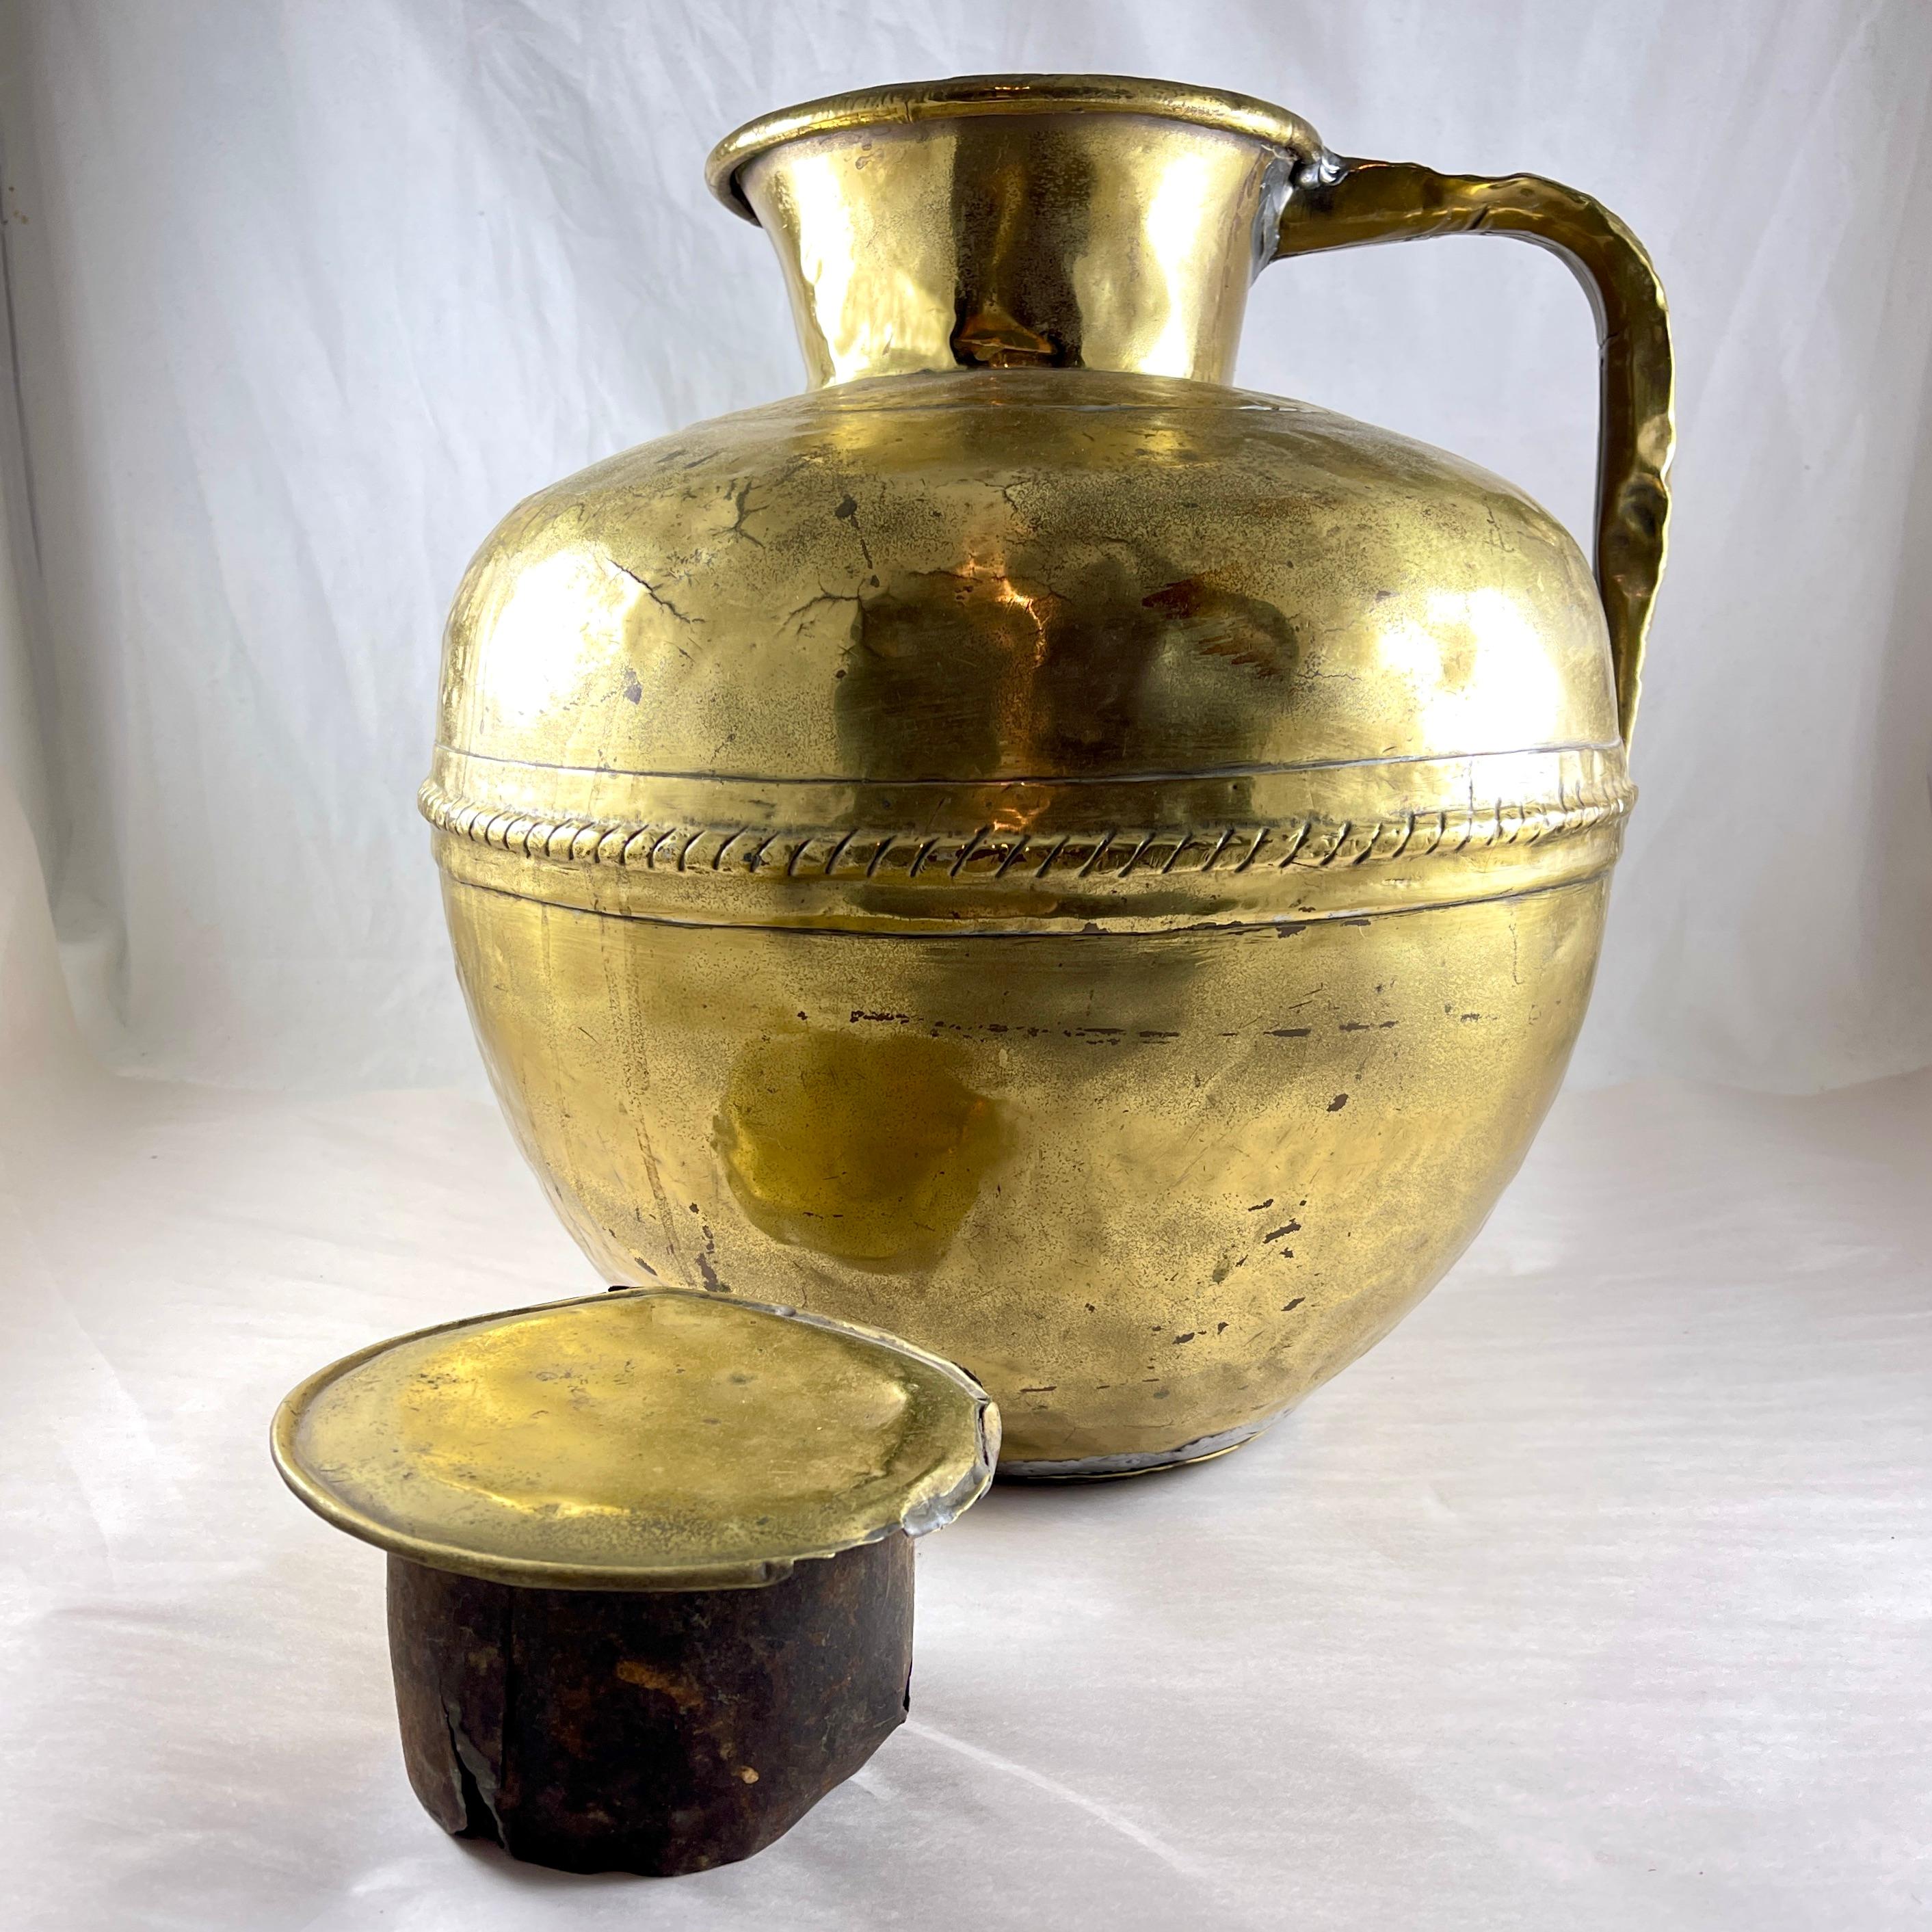 Hammered French Normandy Large Rustic Brass Milk Jug with Lid – circa 1850 For Sale